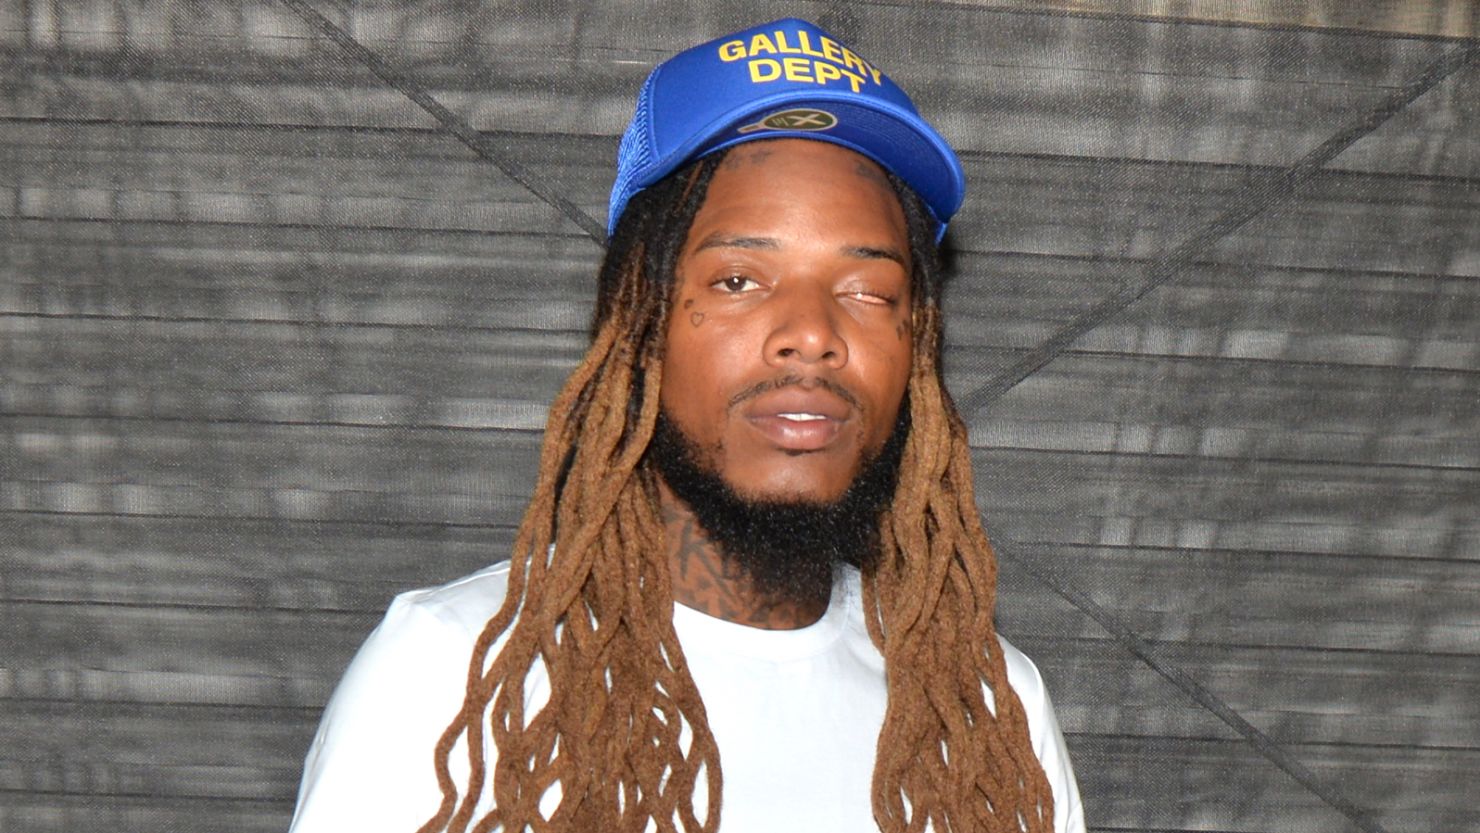 Fetty Wap attends the Abyss by Abby show on July 14, 2022, in Miami Beach, Florida.